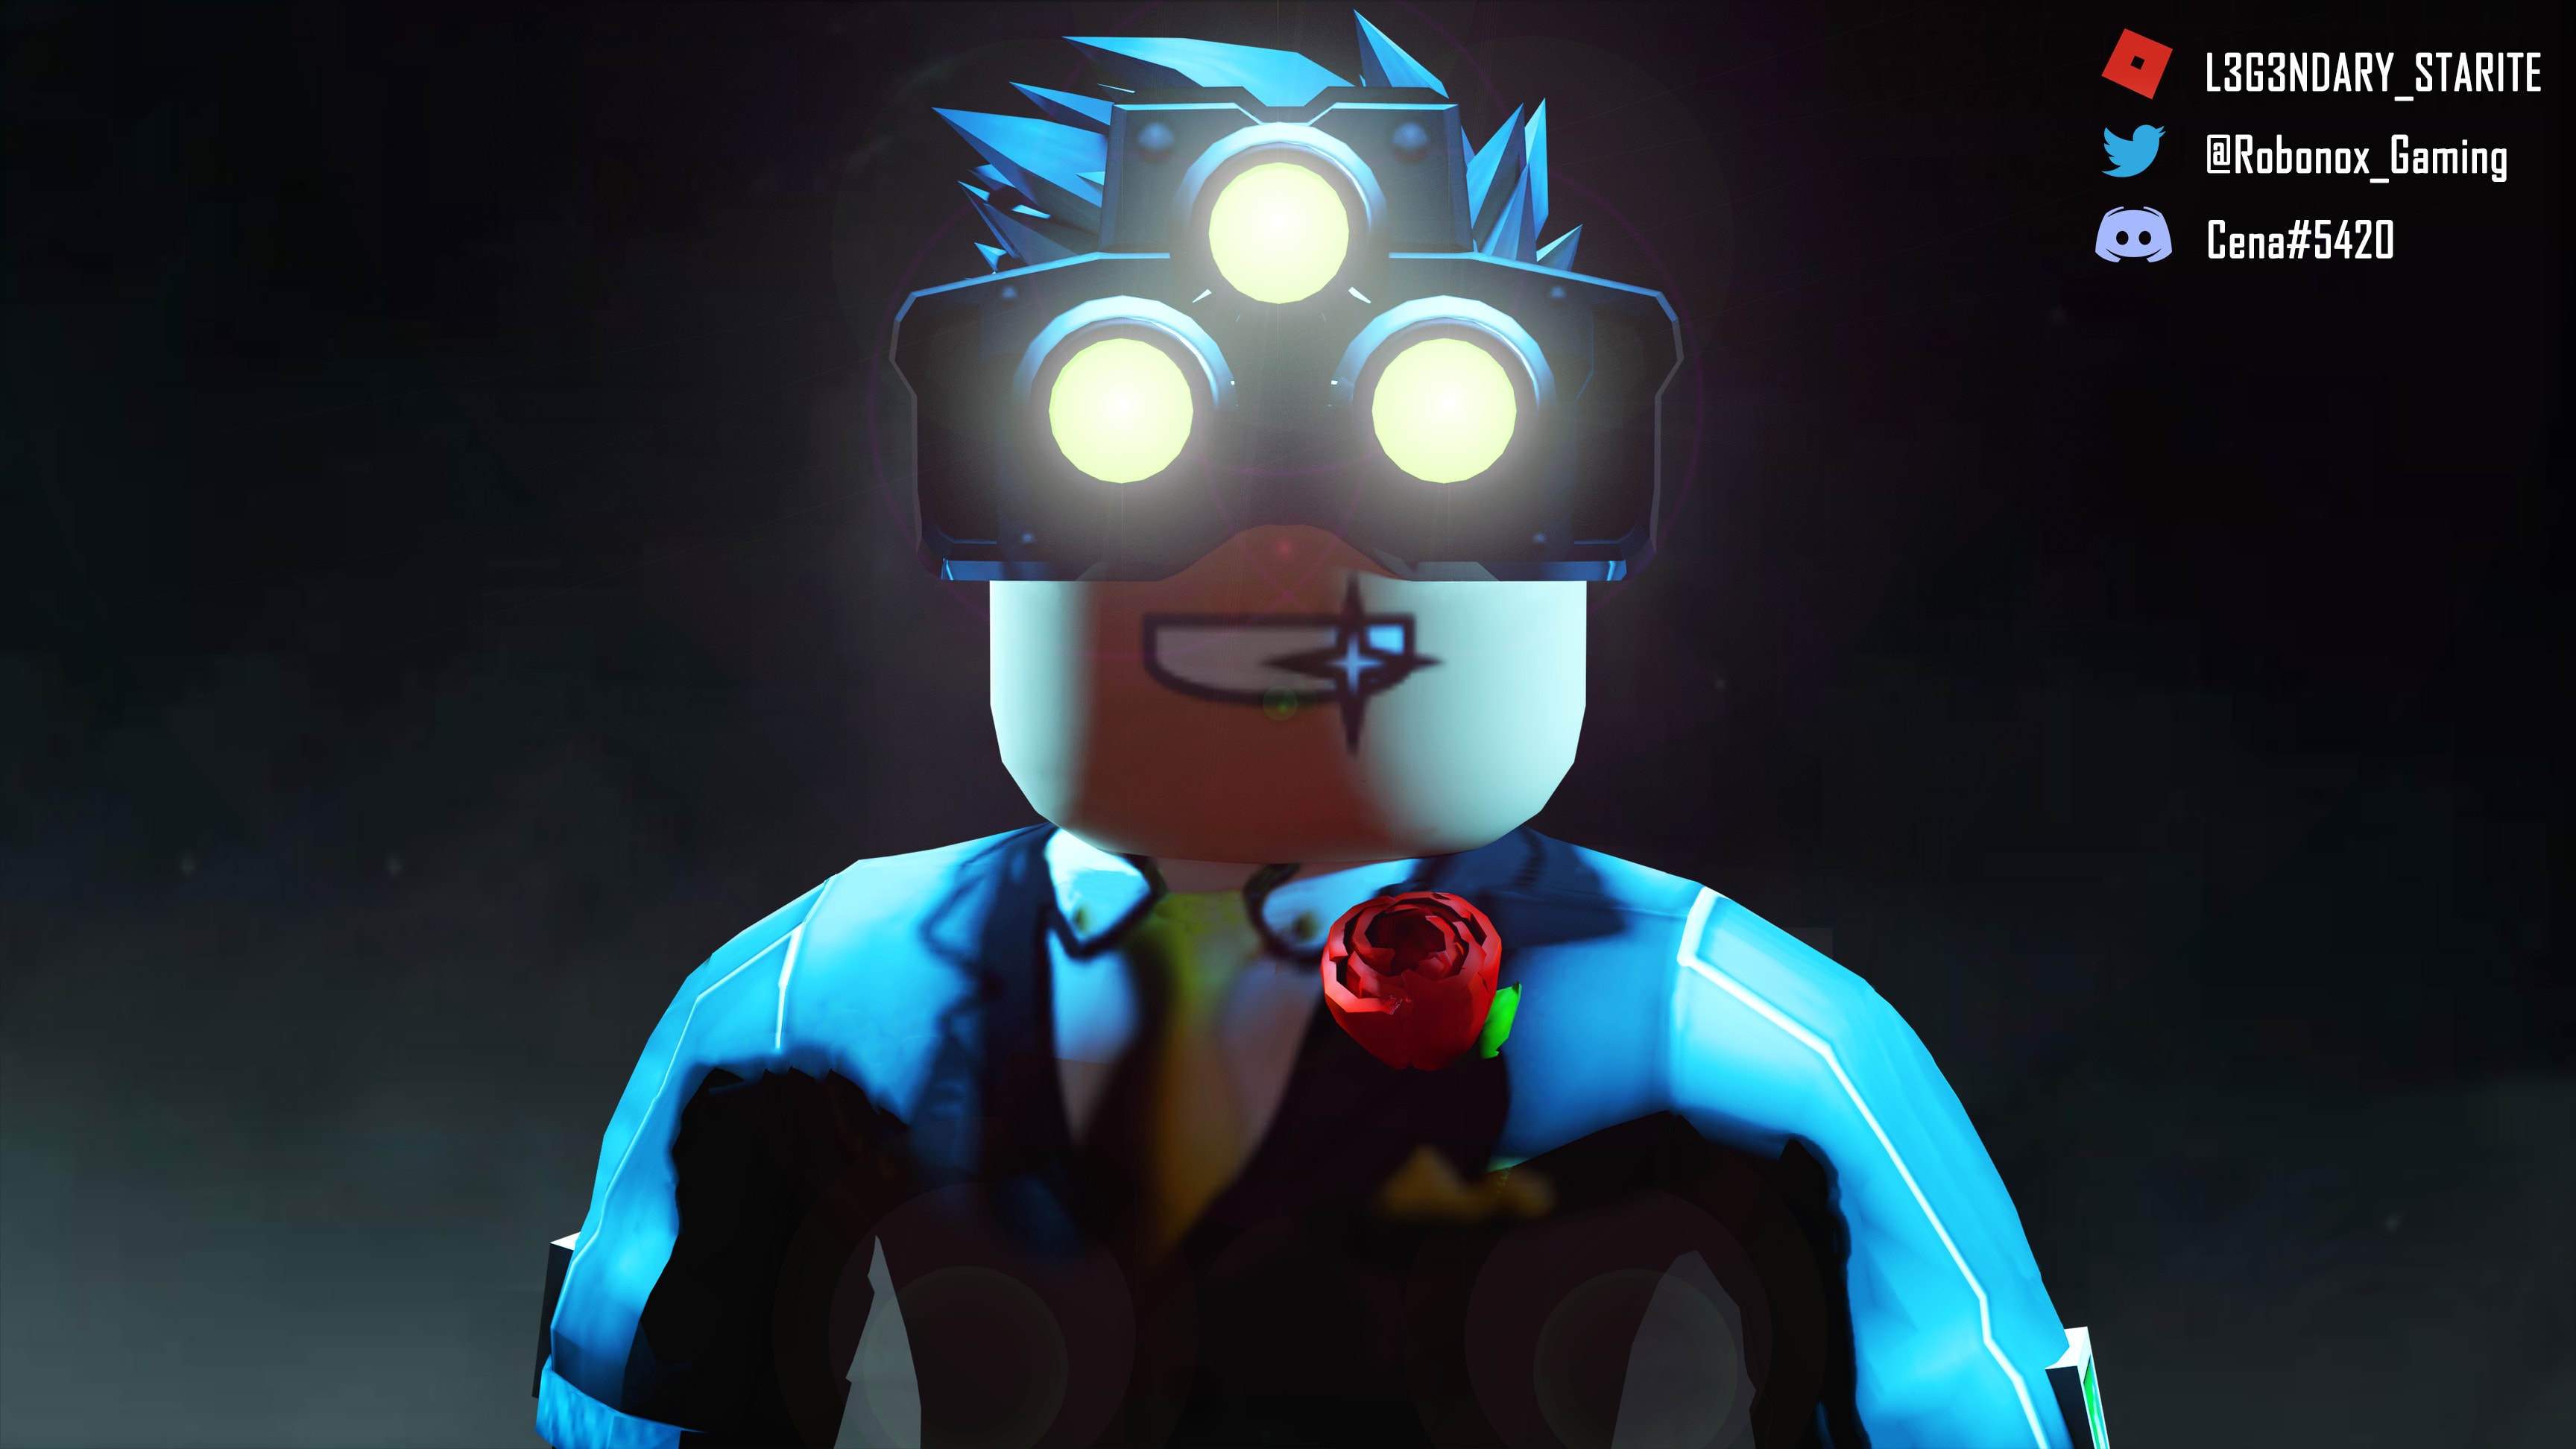 Create Blender Render For Your Roblox Avatar By Abhimanyu Bagga - how to animate your roblox character in blender